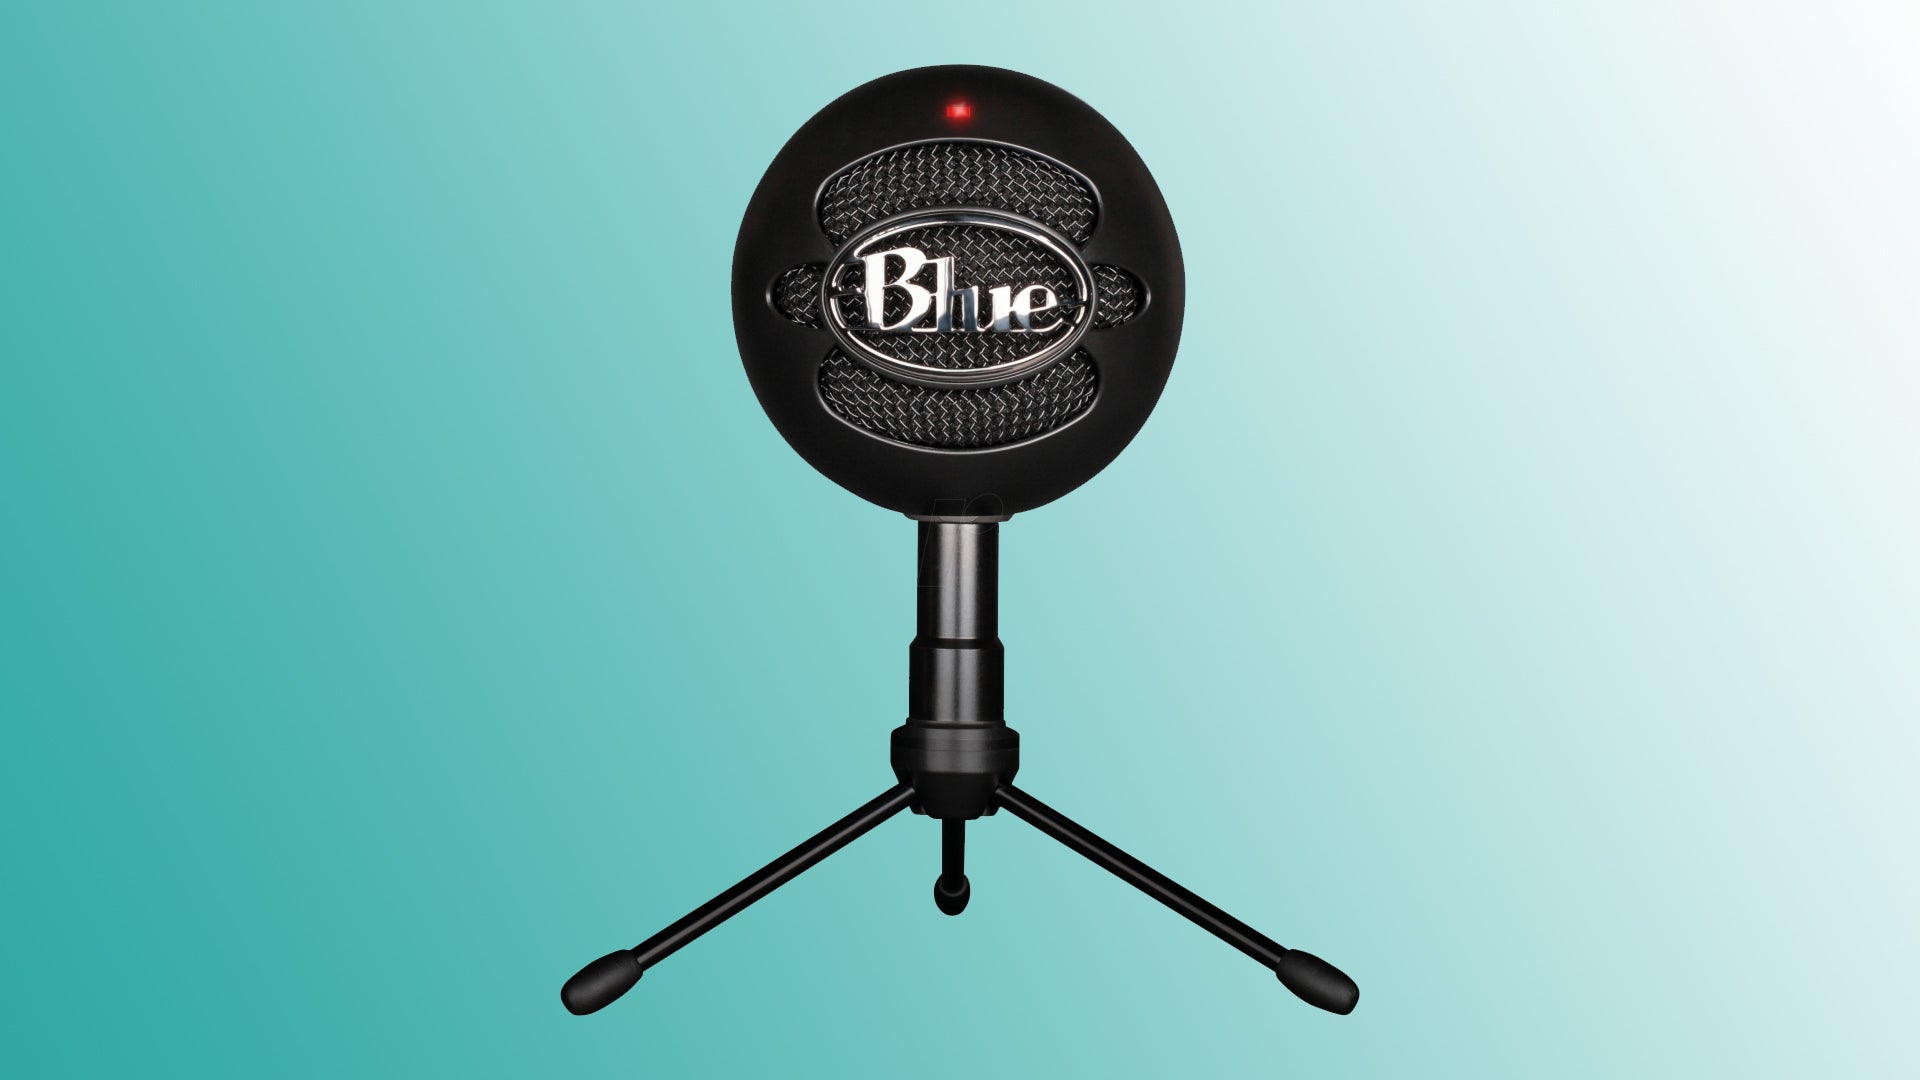 Image of an Blue Snowball iCE microphone on a blue to white gradient background.